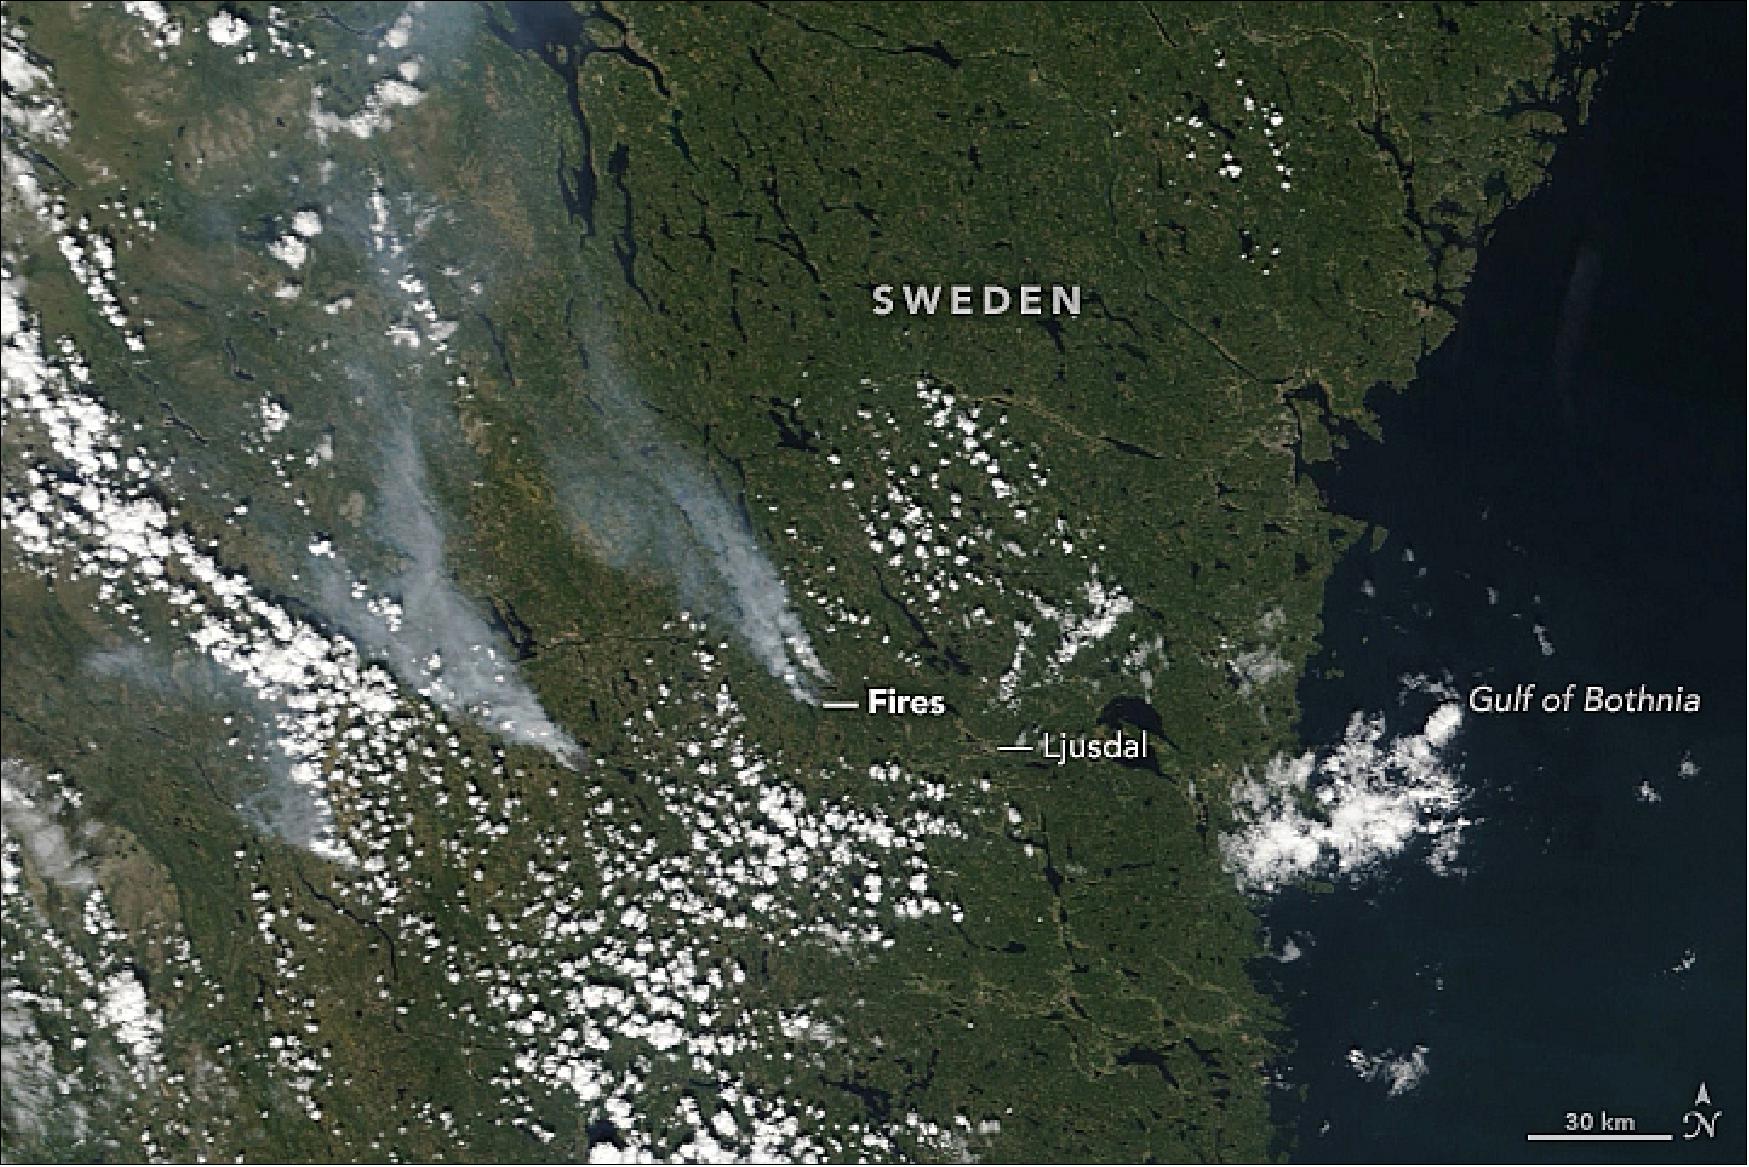 Figure 19: This natural-color image was acquired by MODIS on NASA’s Terra satellite on July 17, 2018. The largest fire was near Ljusdal, although Kårböle, Jämtland, and several towns have been evacuated due to fires. No fatalities have been reported so far. The Copernicus Atmosphere Monitoring Service forecast model shows an increase in fine particulate pollution above the fire-stricken areas this week (image credit: NASA Earth Observatory image by Lauren Dauphin and Joshua Stevens, using MODIS data from LANCE/EOSDIS Rapid Response and the Level 1 and Atmospheres Active Distribution System (LAADS). Story by Kasha Patel)